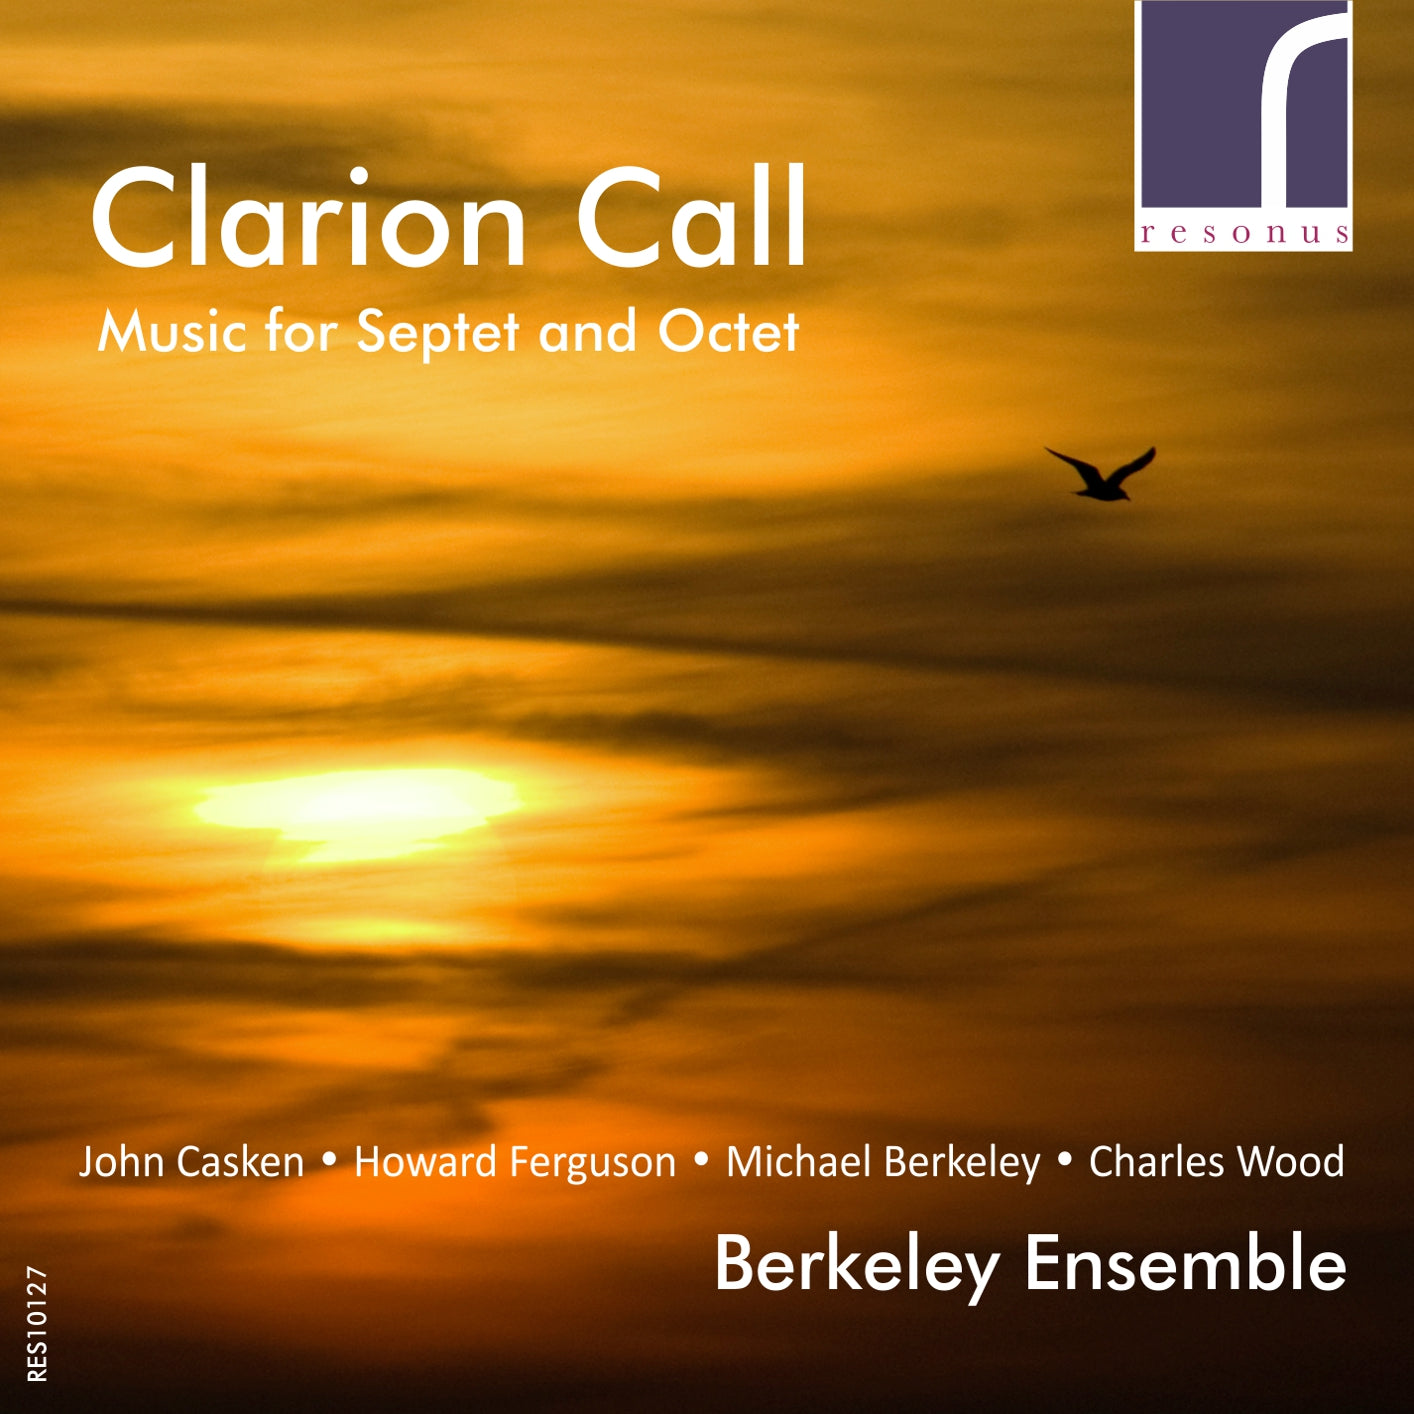 Clarion Call: Music for Septet and Octet